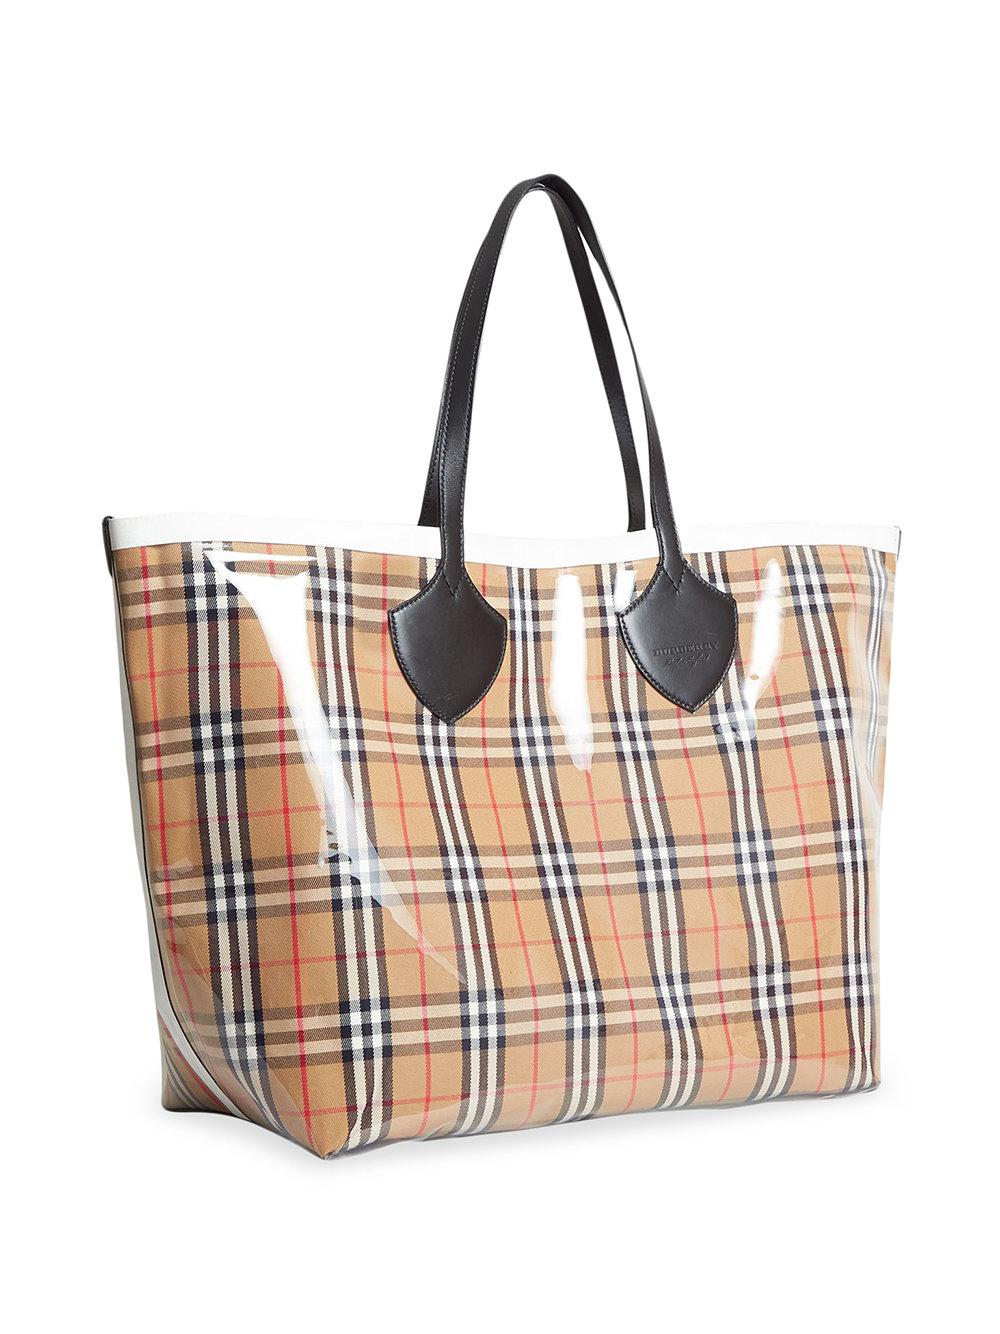 Burberry The Giant Reversible Tote In Plastic And Vintage Check